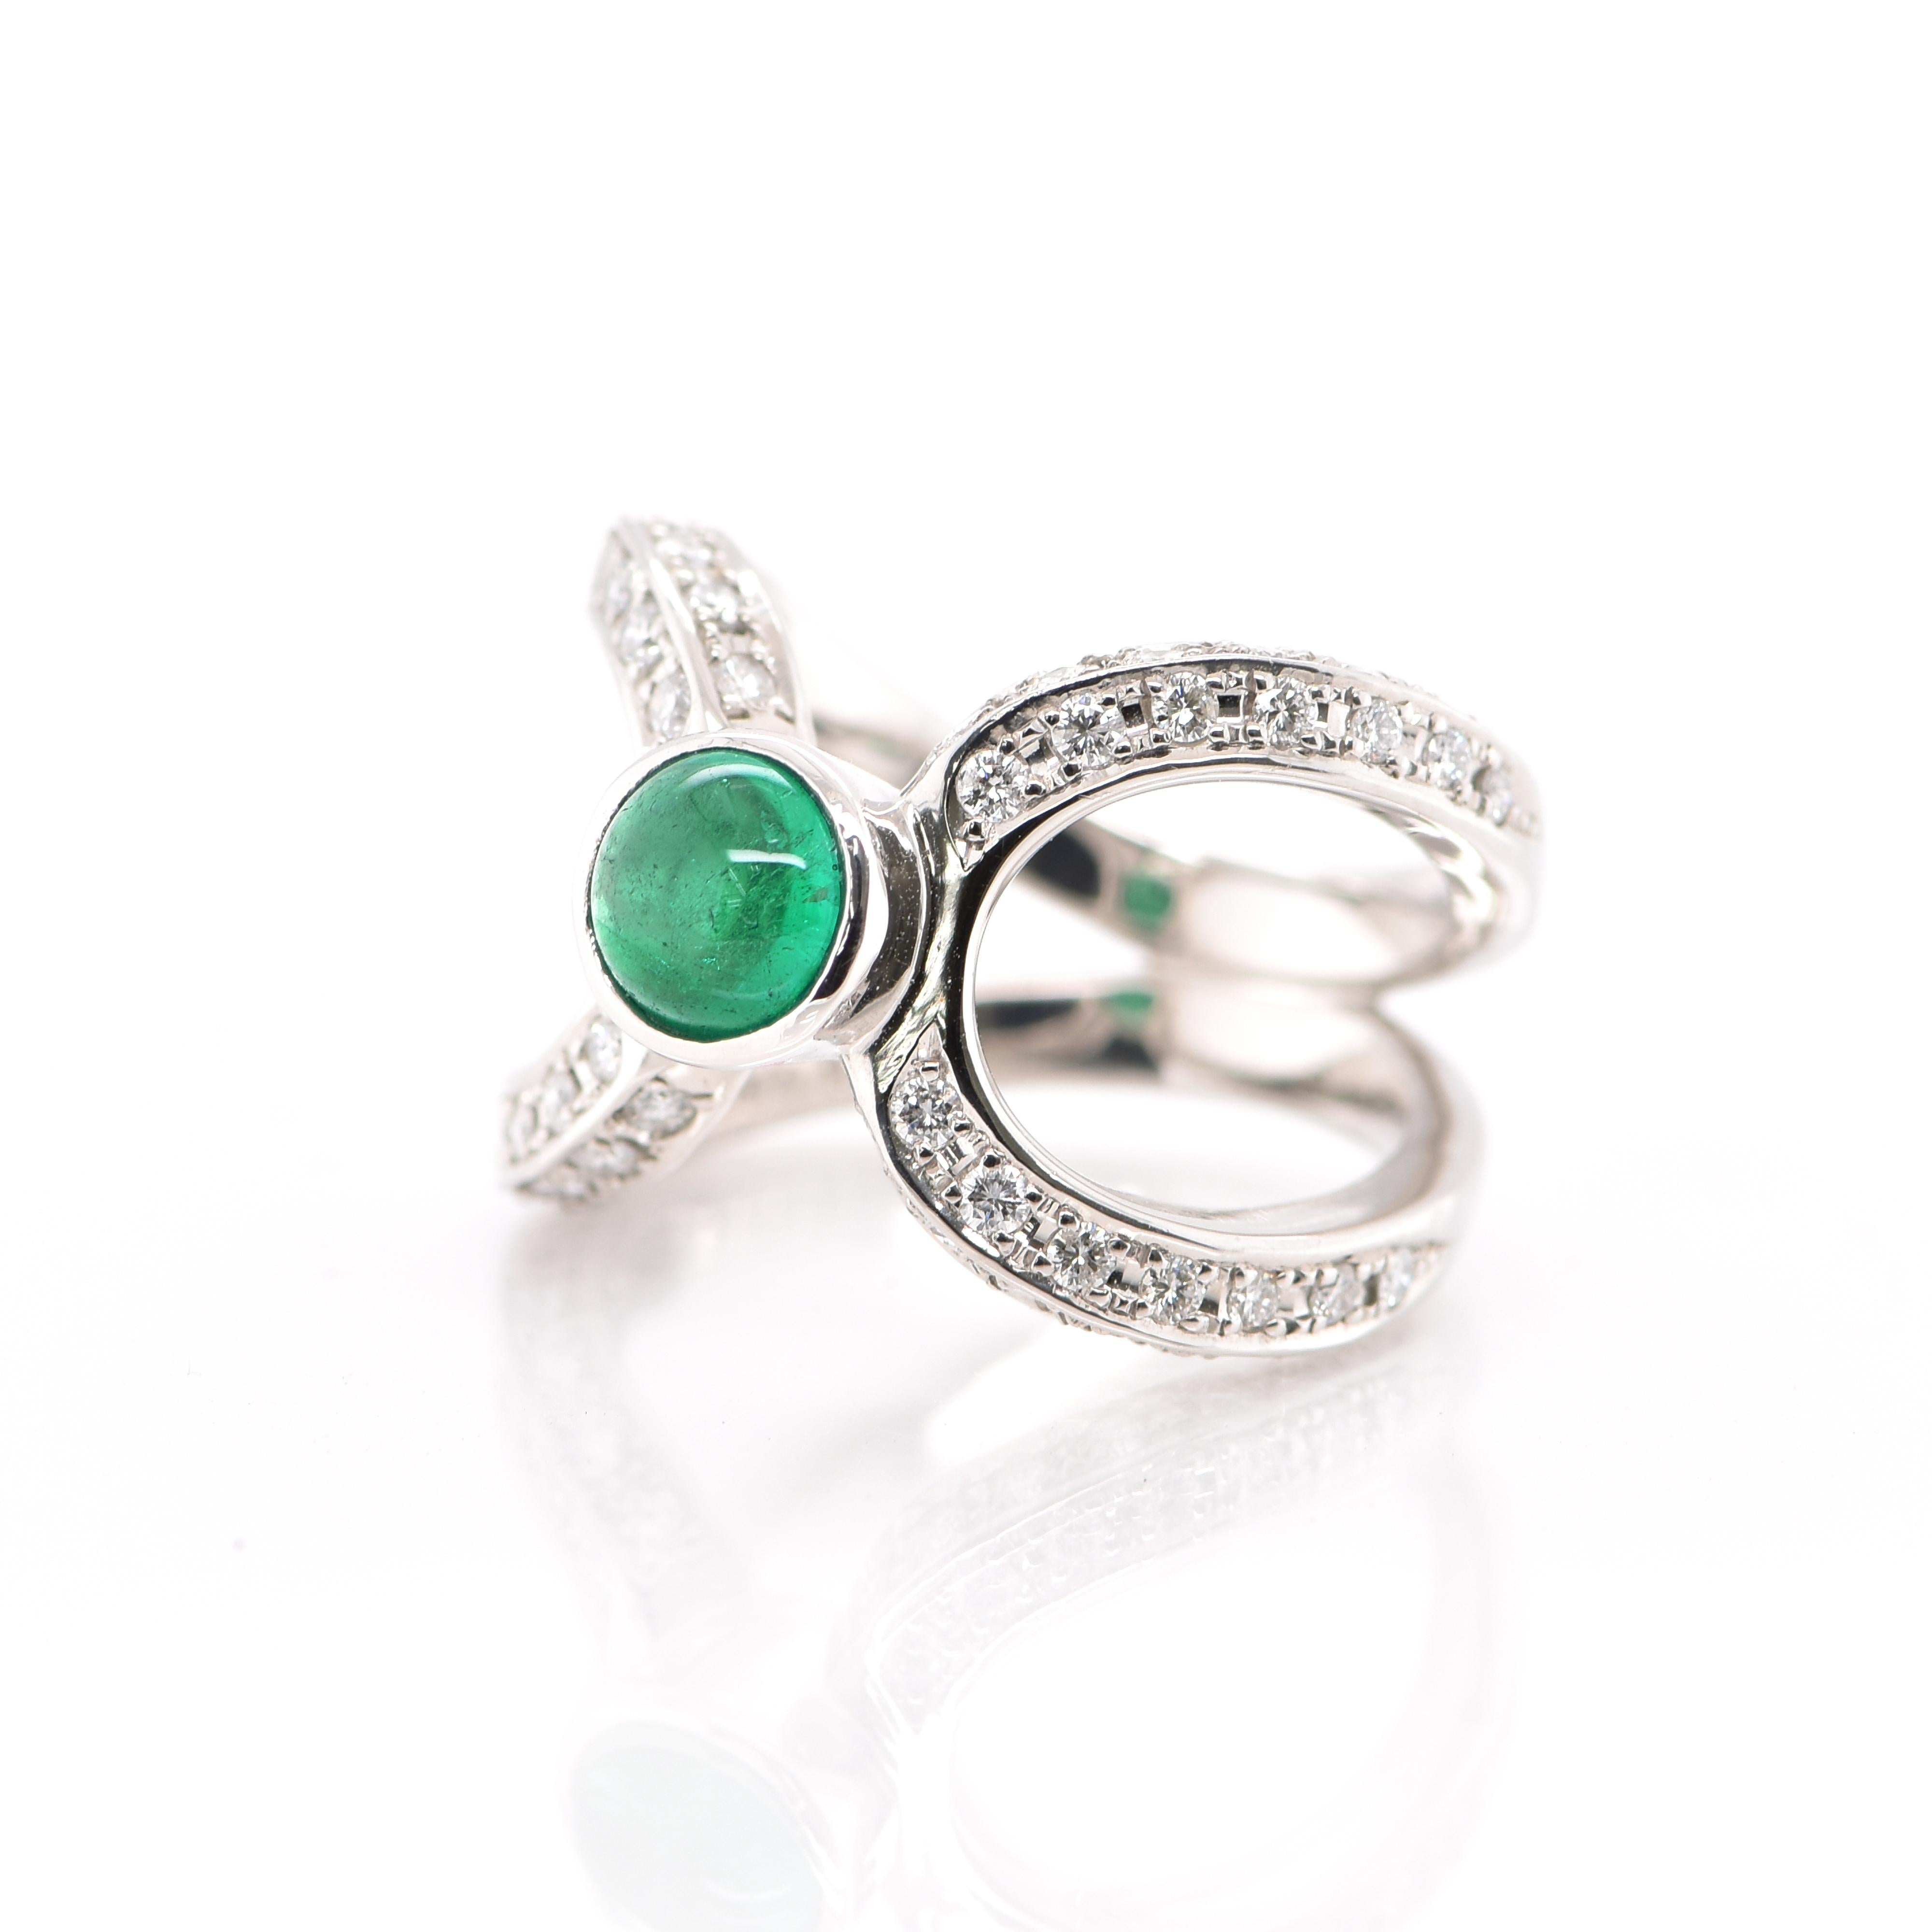 A stunning Ring featuring a 0.86 Emerald Cabochon and 0.68 Carats of Diamond Accents set in Platinum. People have admired emerald’s green for thousands of years. Emeralds have always been associated with the lushest landscapes and the richest